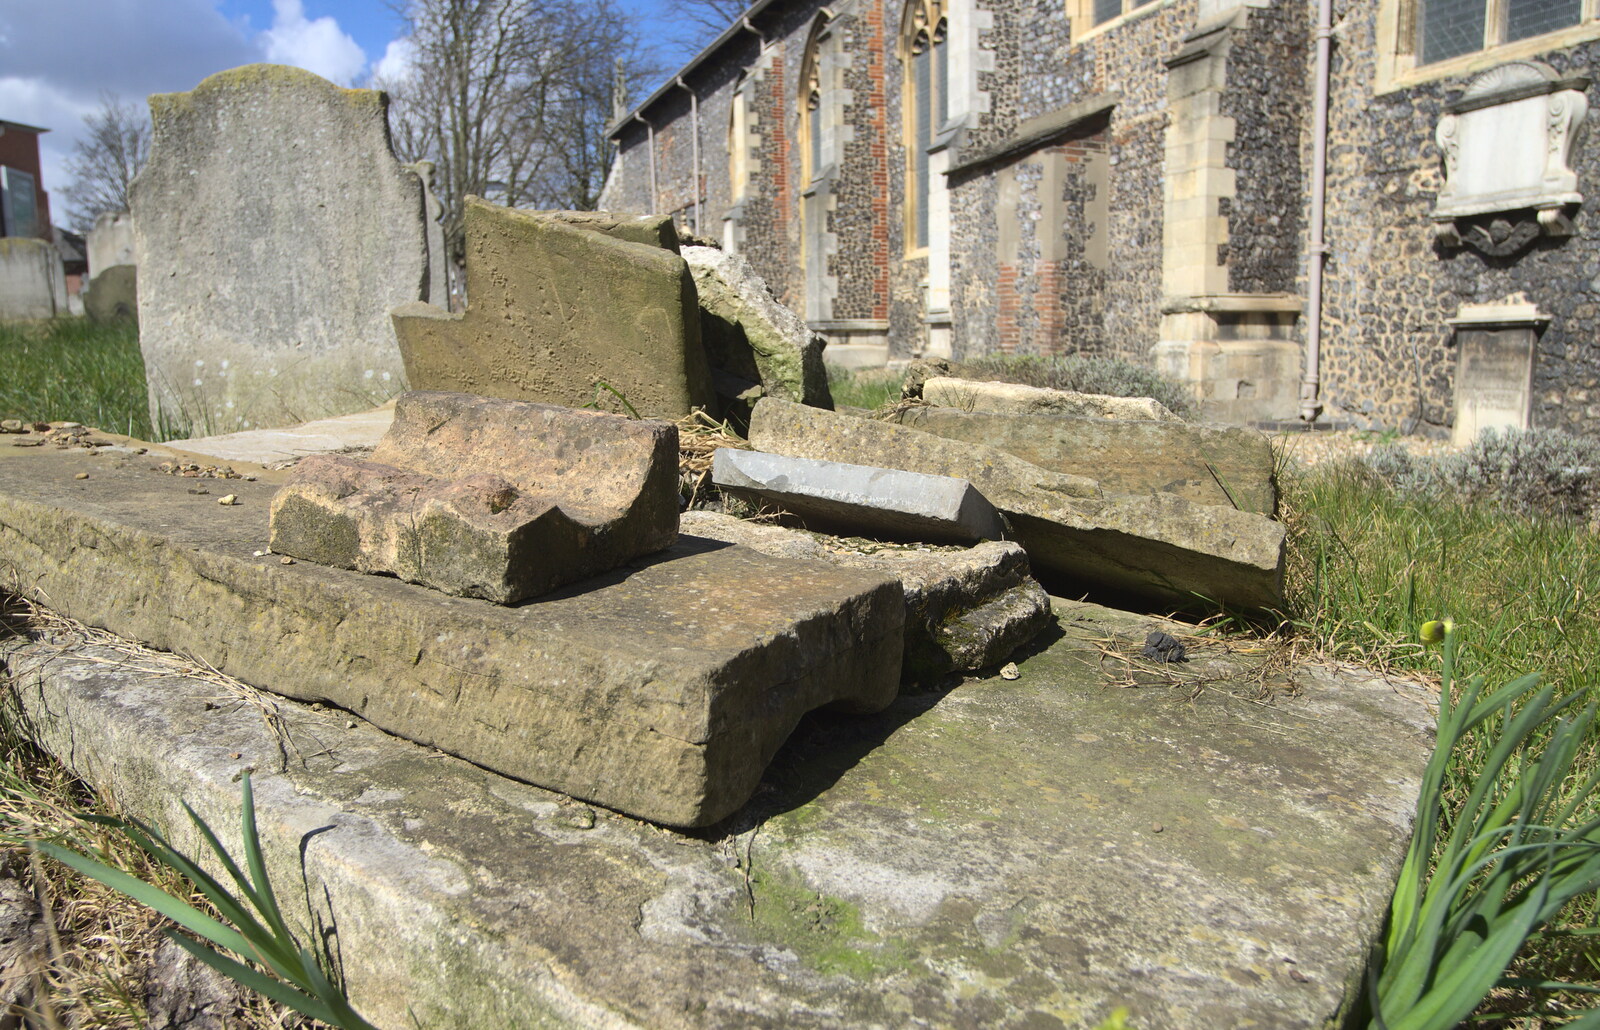 A pile of gravestones from A Very Random Norwich Day, and The BBs at Laxfield, Norfolk and Suffolk - 13th April 2013